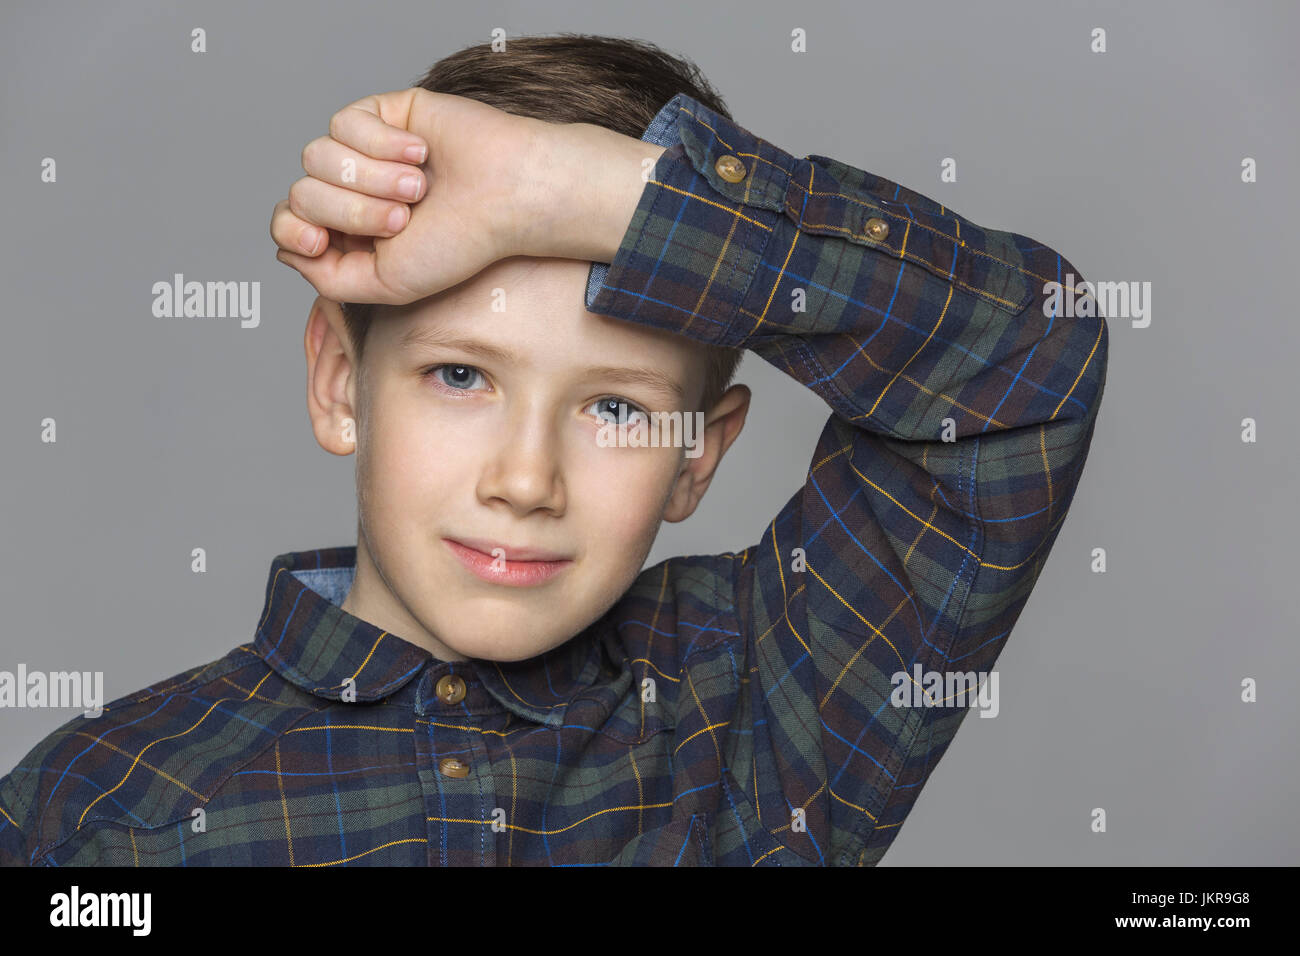 Portrait of boy with arm raised against gray background Stock Photo